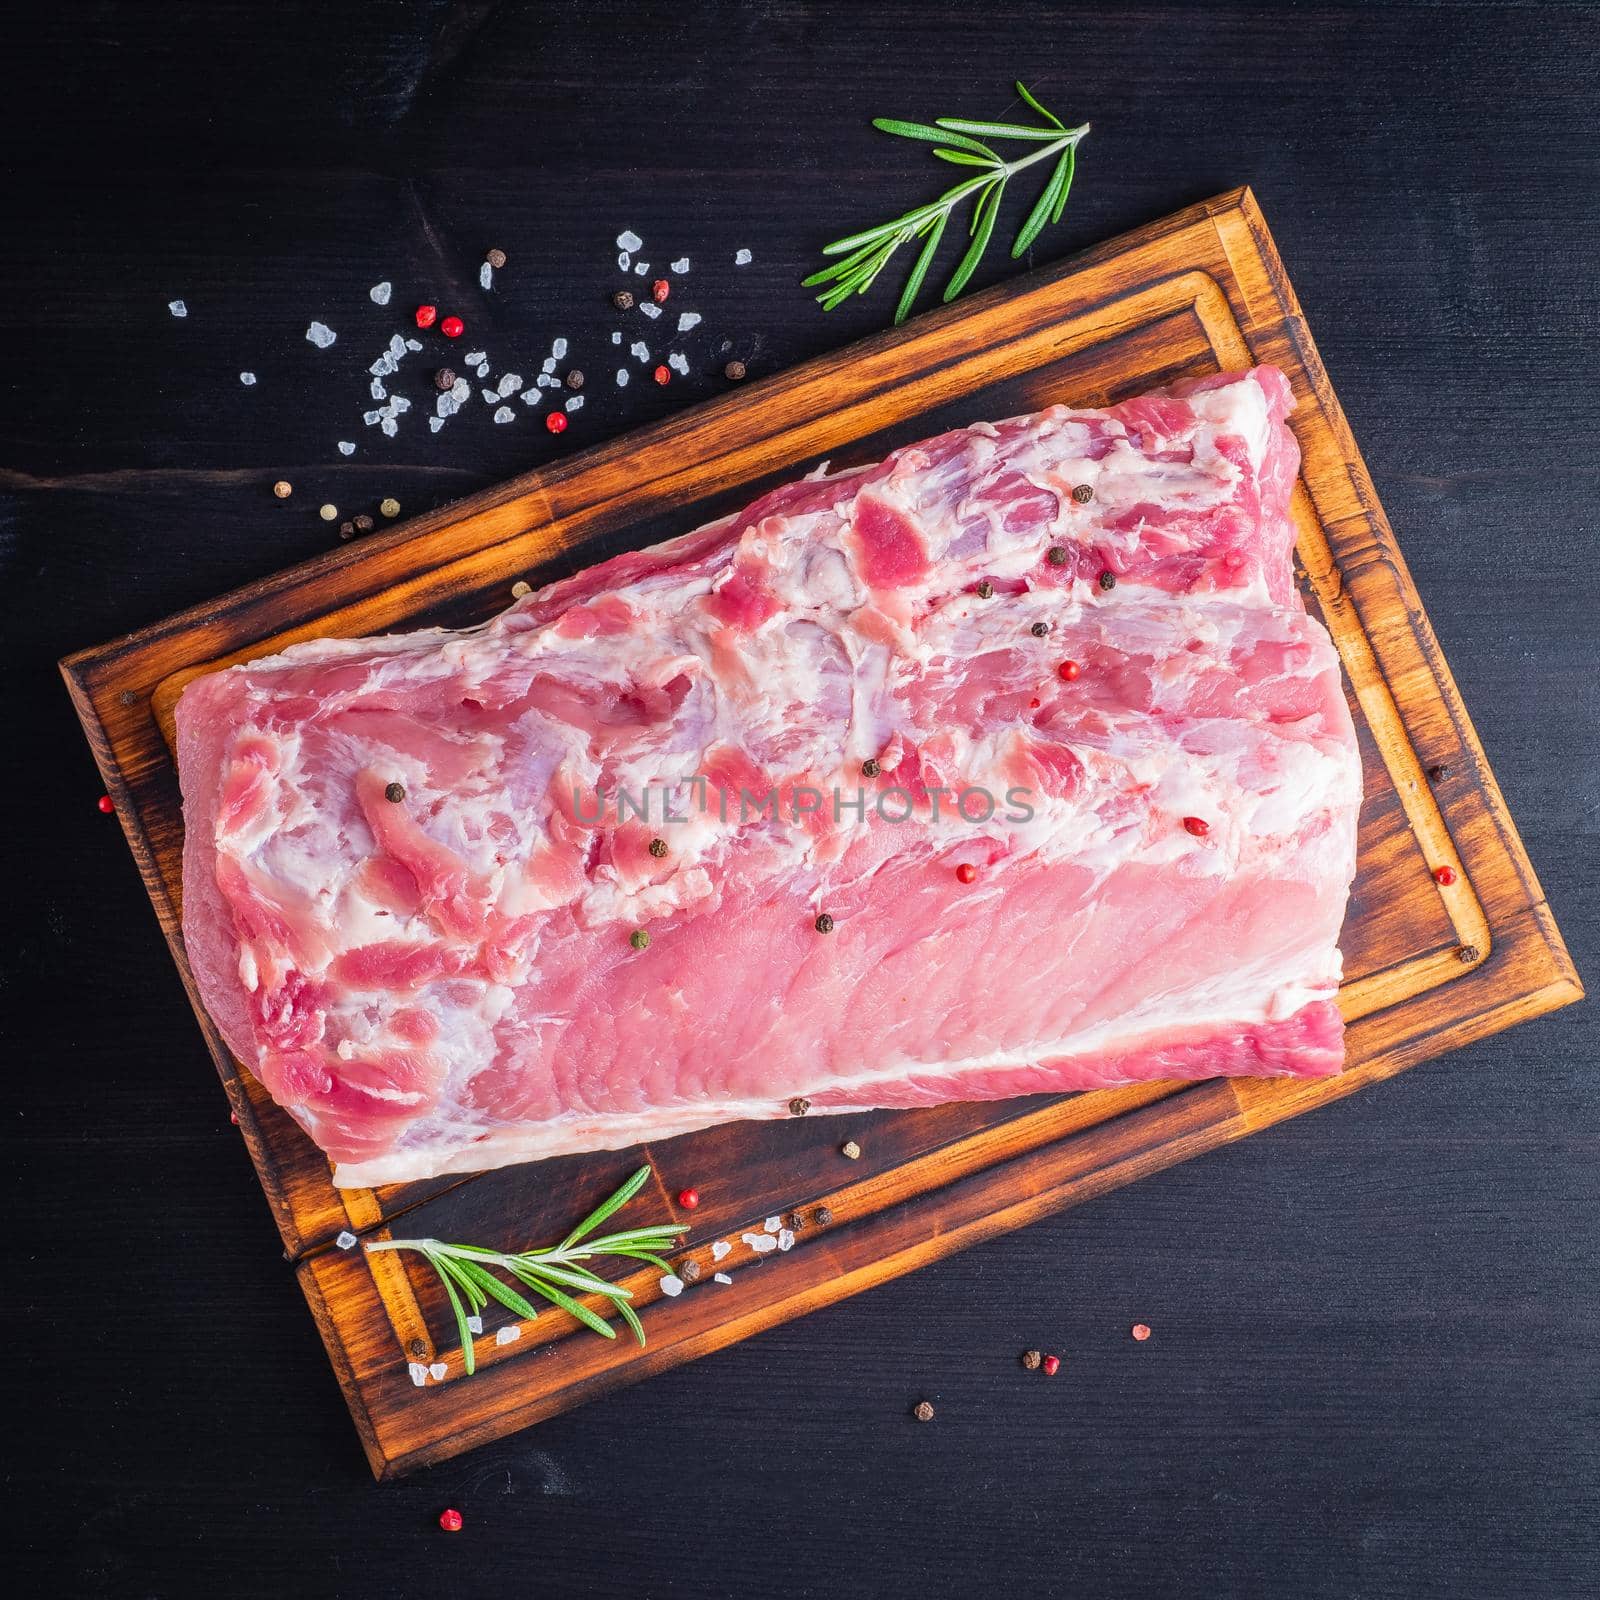 Big whole piece of pork meat with seasoning on chopping board on dark background with rosemary, seasonings, top view.